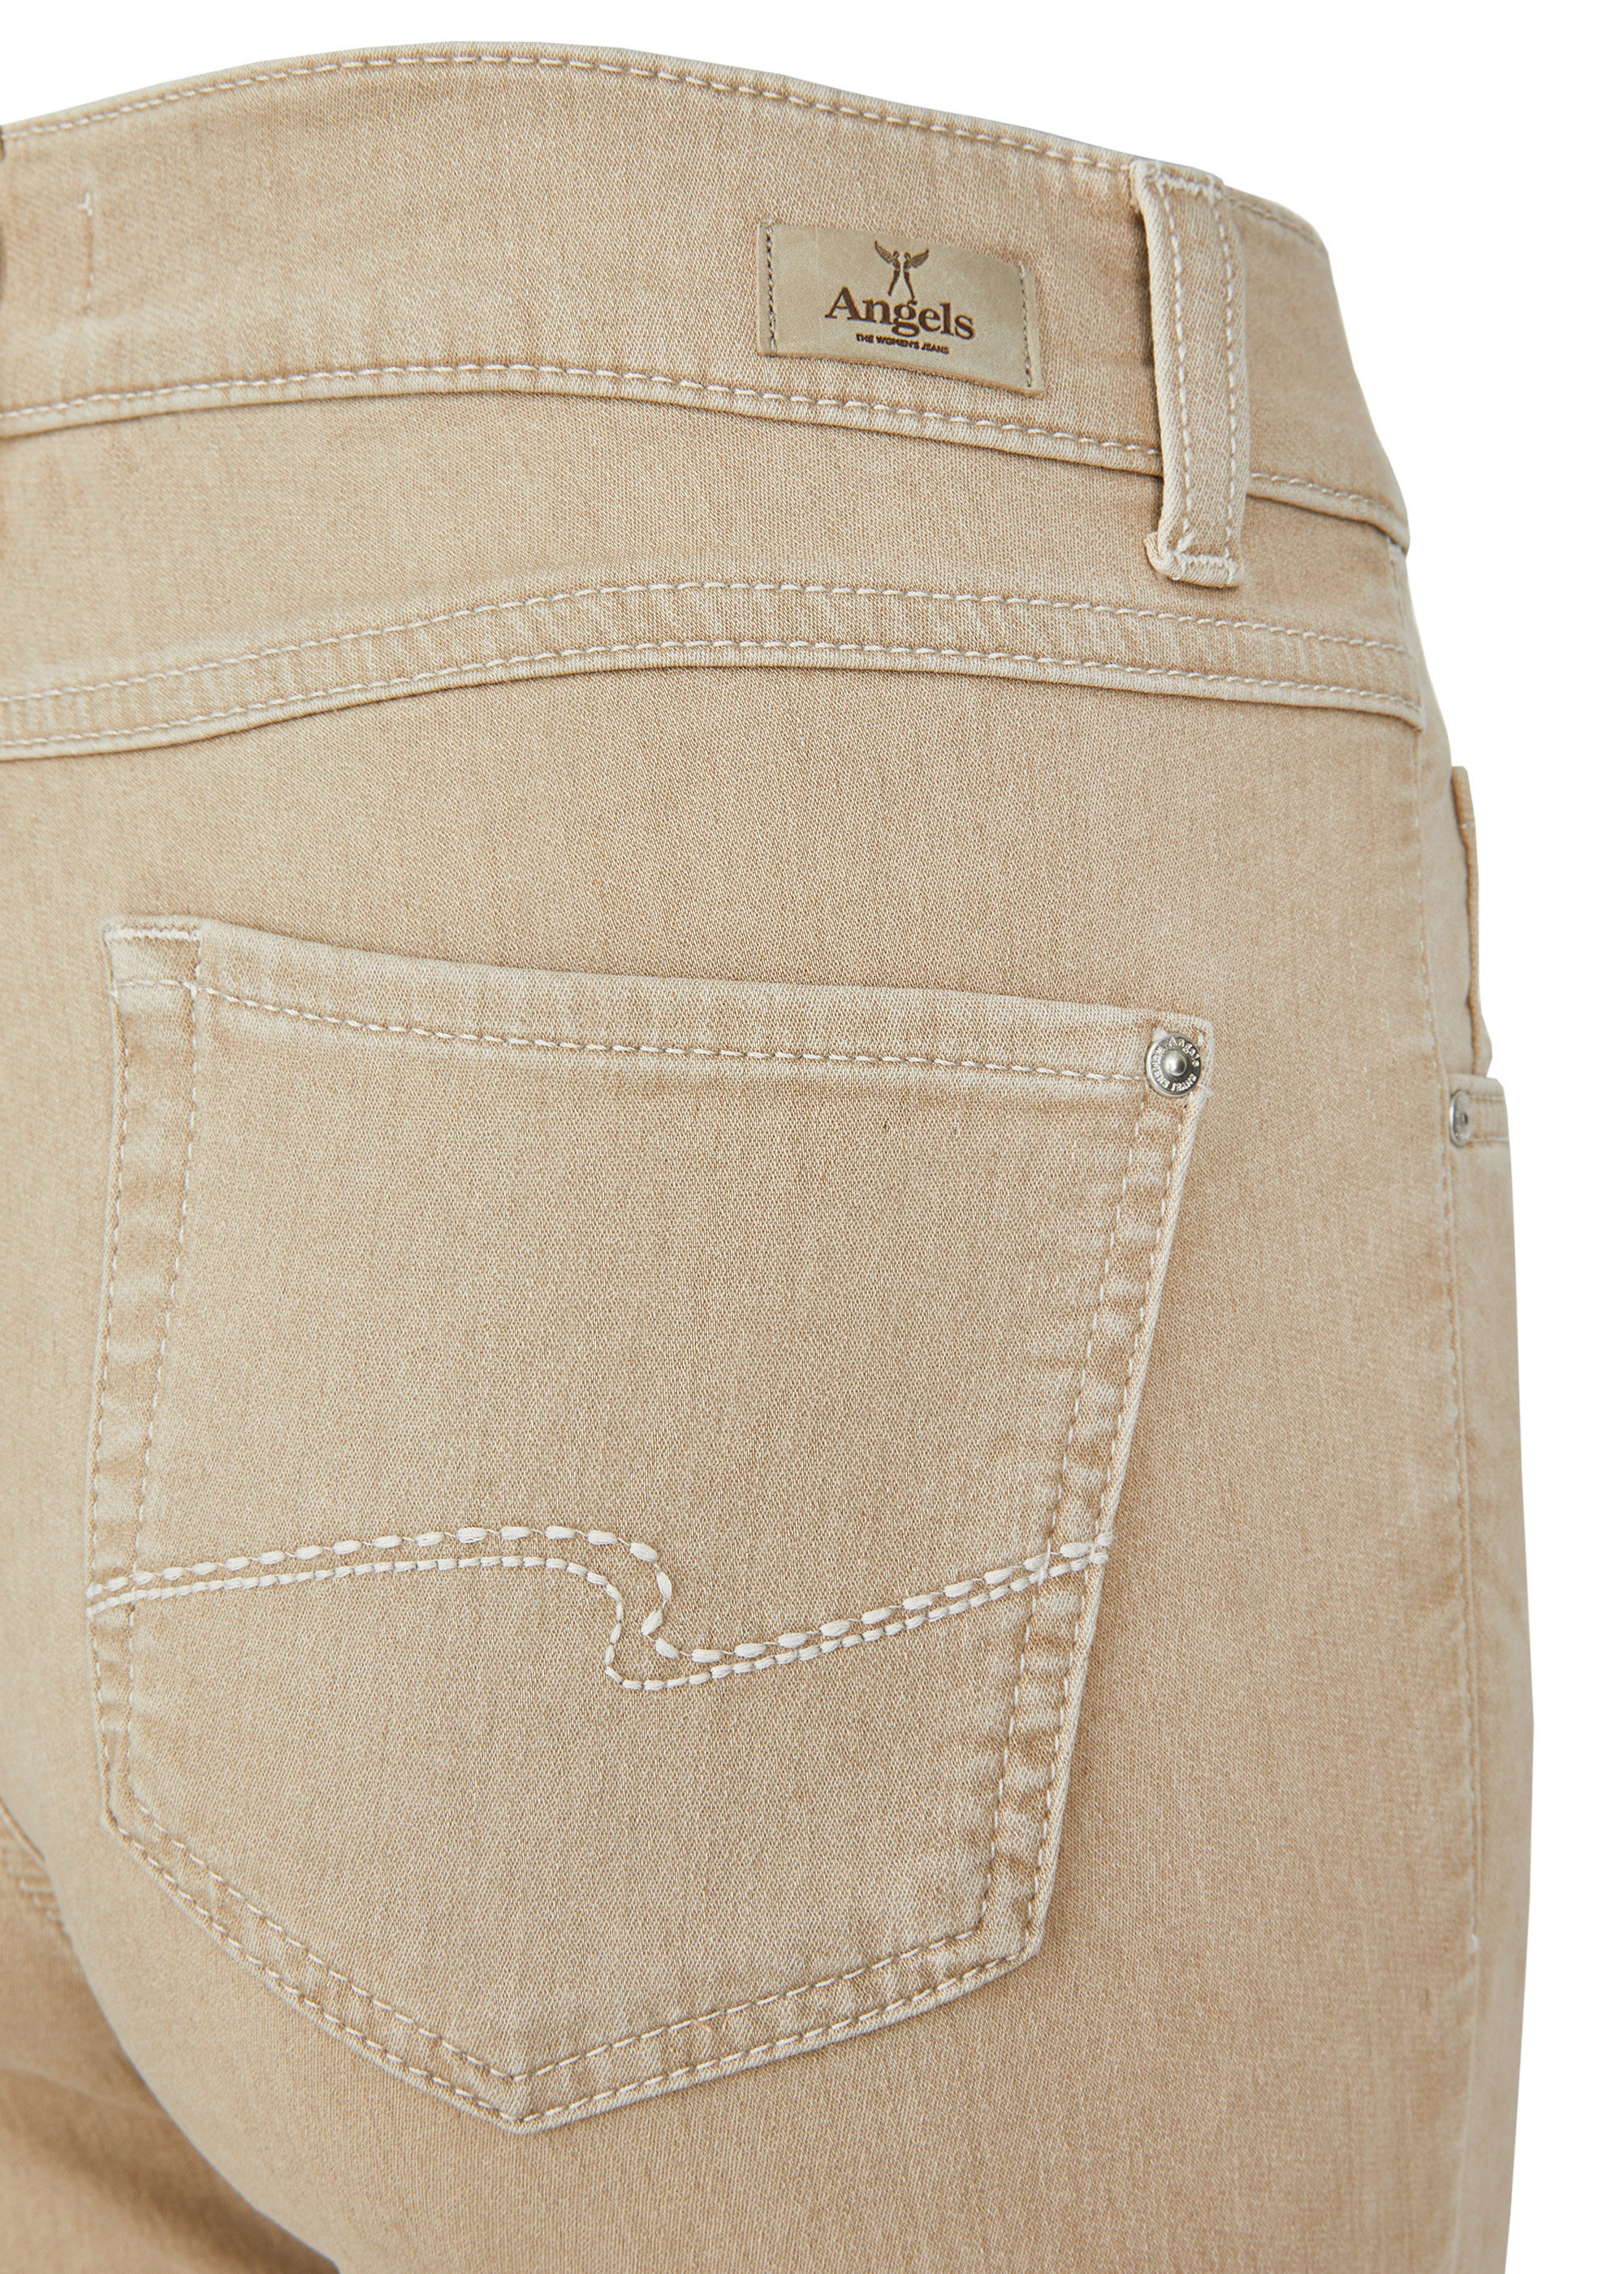 Angels Jeans in Beige 